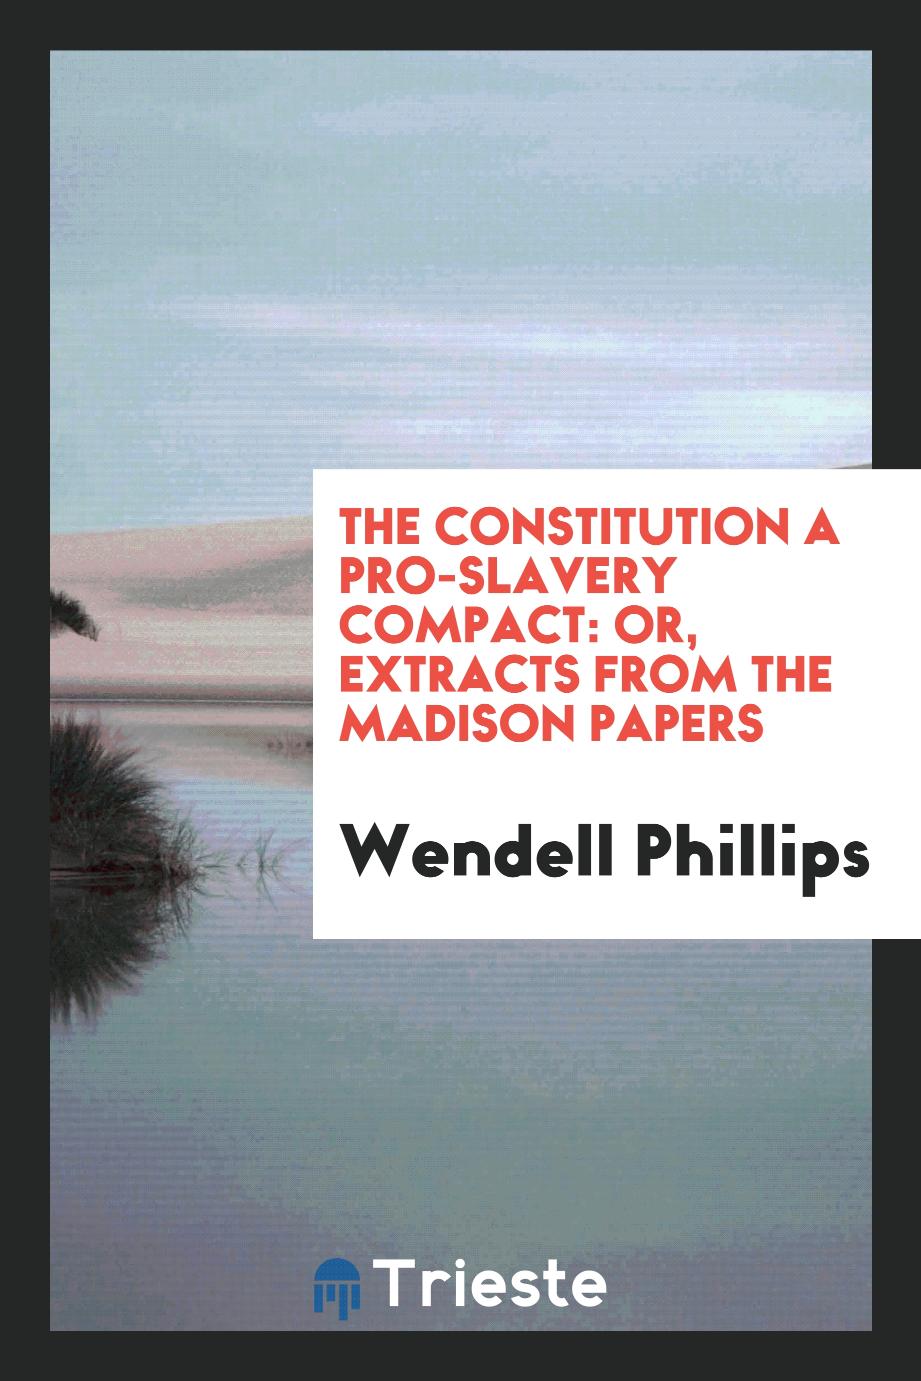 The Constitution a pro-slavery compact: or, Extracts from the Madison papers